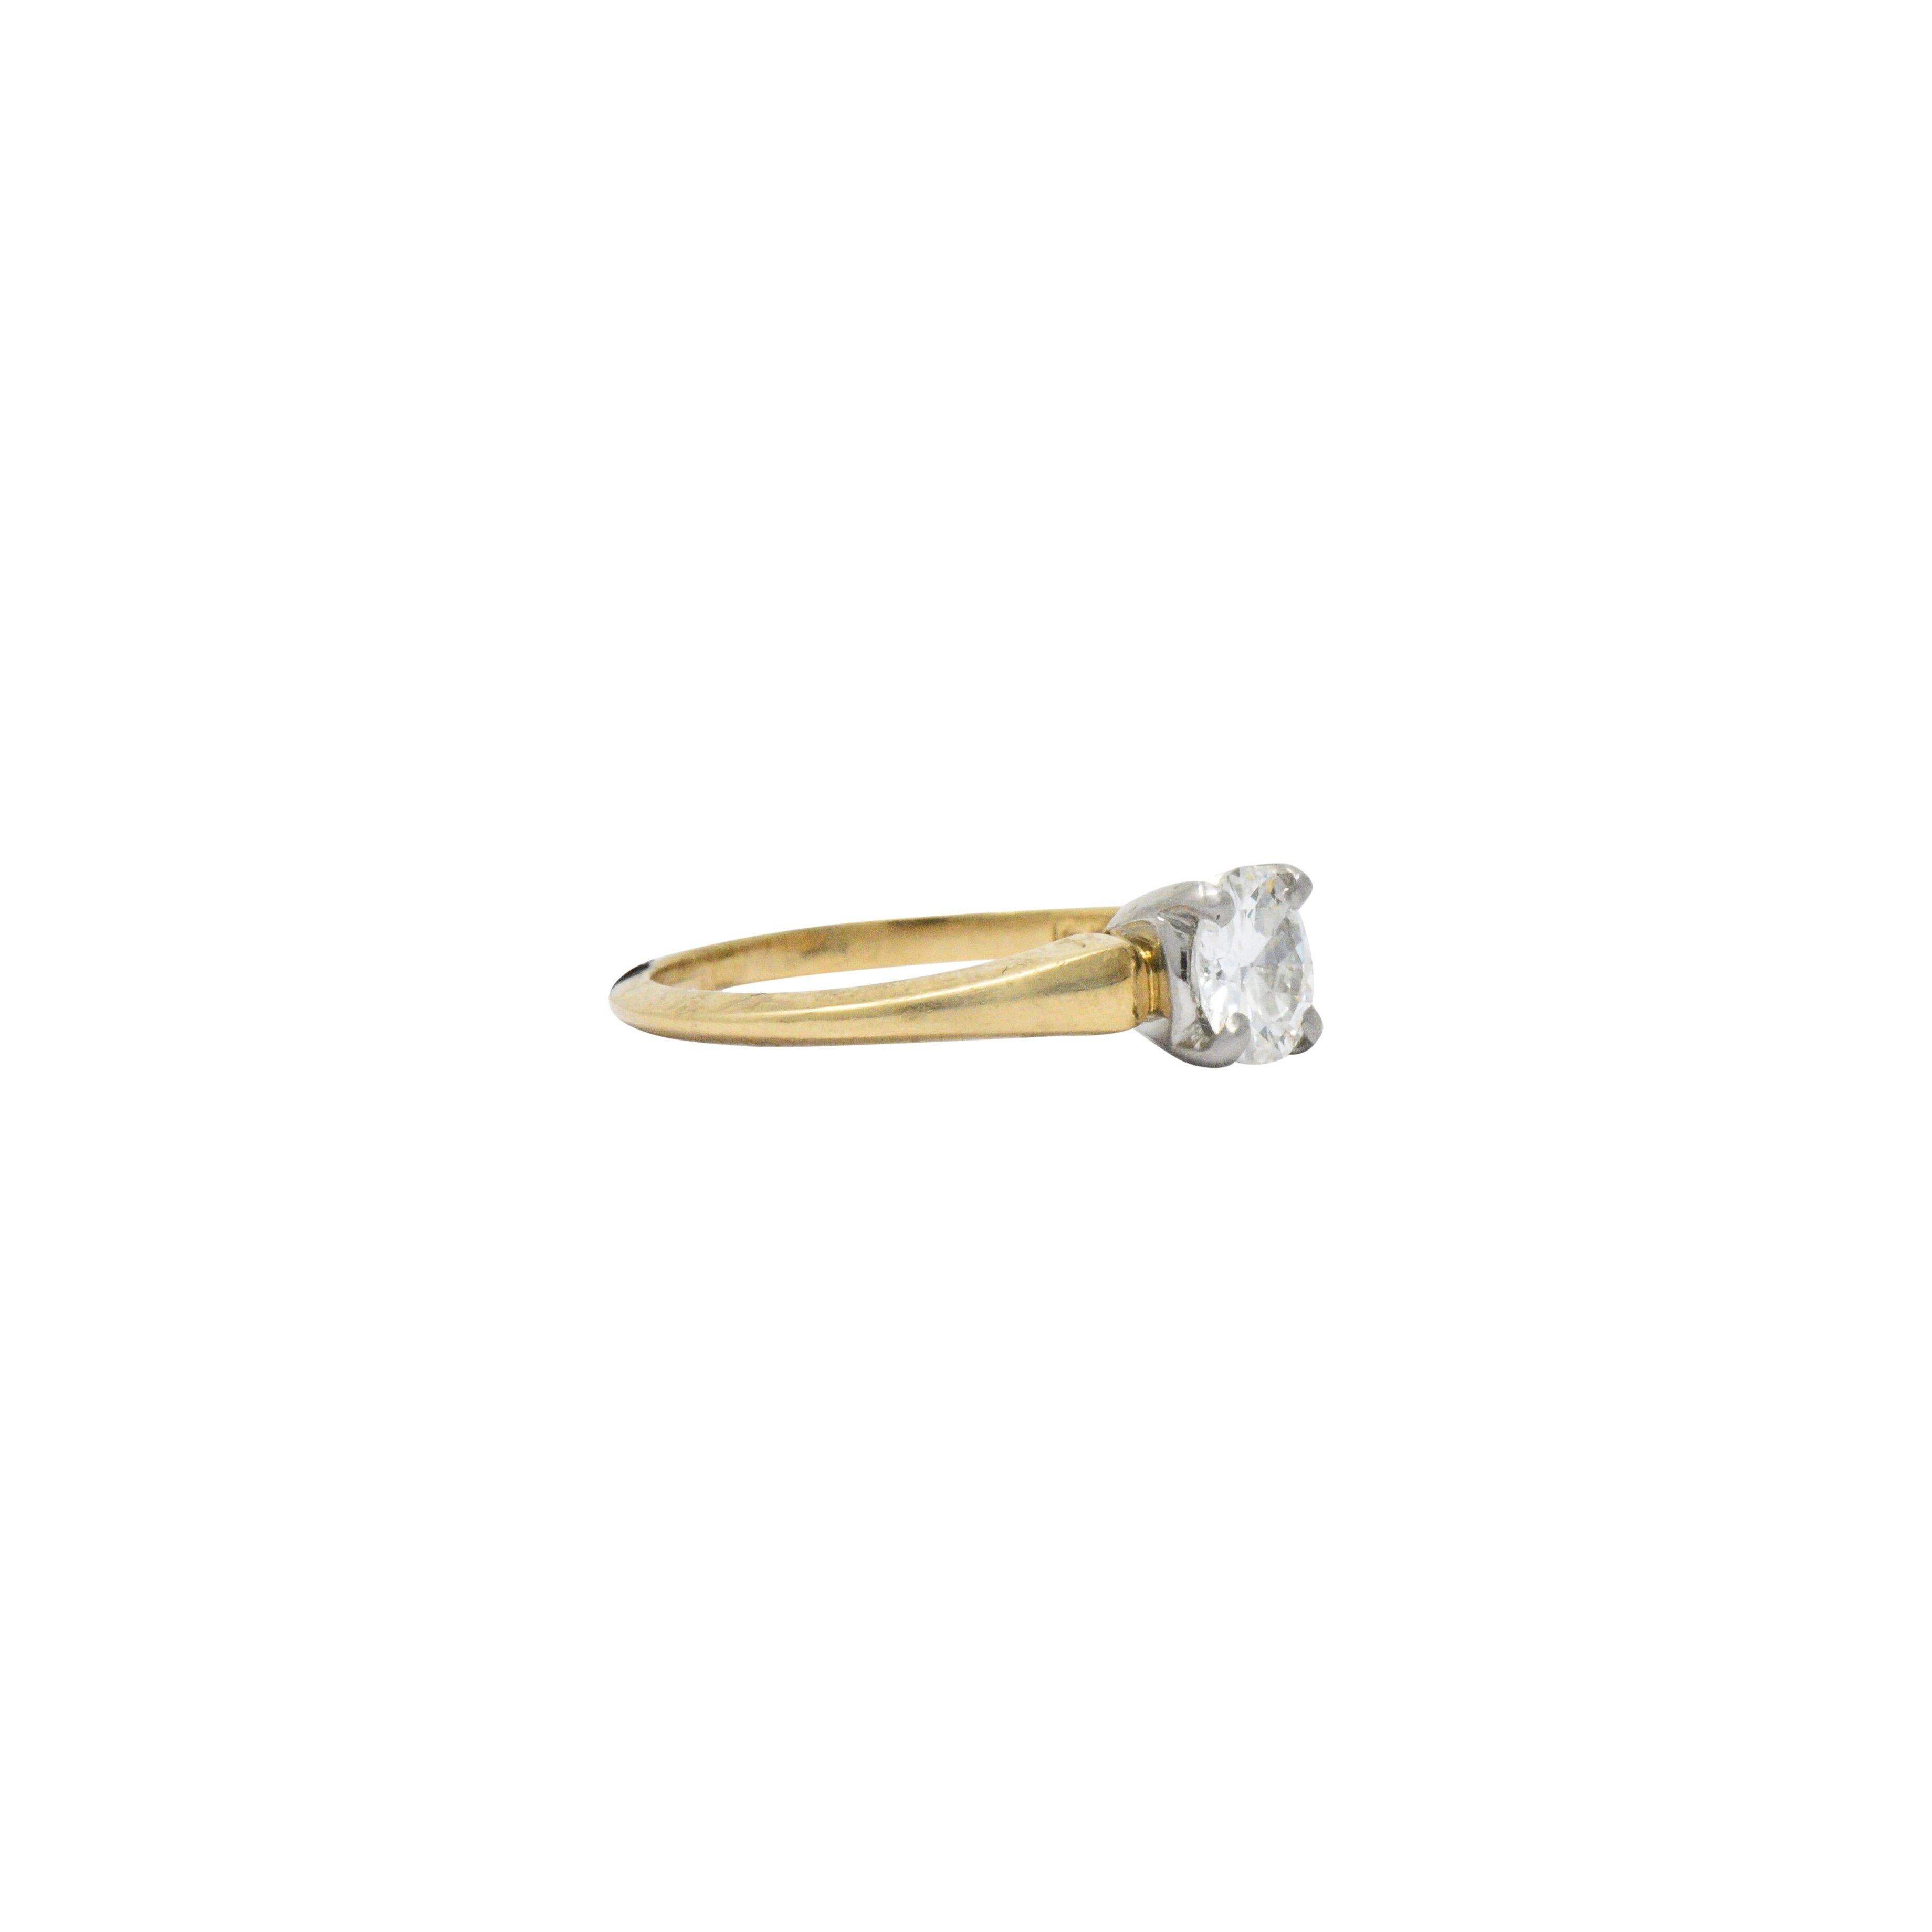 Centering an old European cut diamond weighing 0.61 carats, G/H color and VS clarity

Signed J.E.C. & Co. and numbered P 9204

Setting constructed of 14k yellow gold with platinum head

Ring Size: 5 & Sizable

Top measures 5.6 mm and sits 4.8 mm